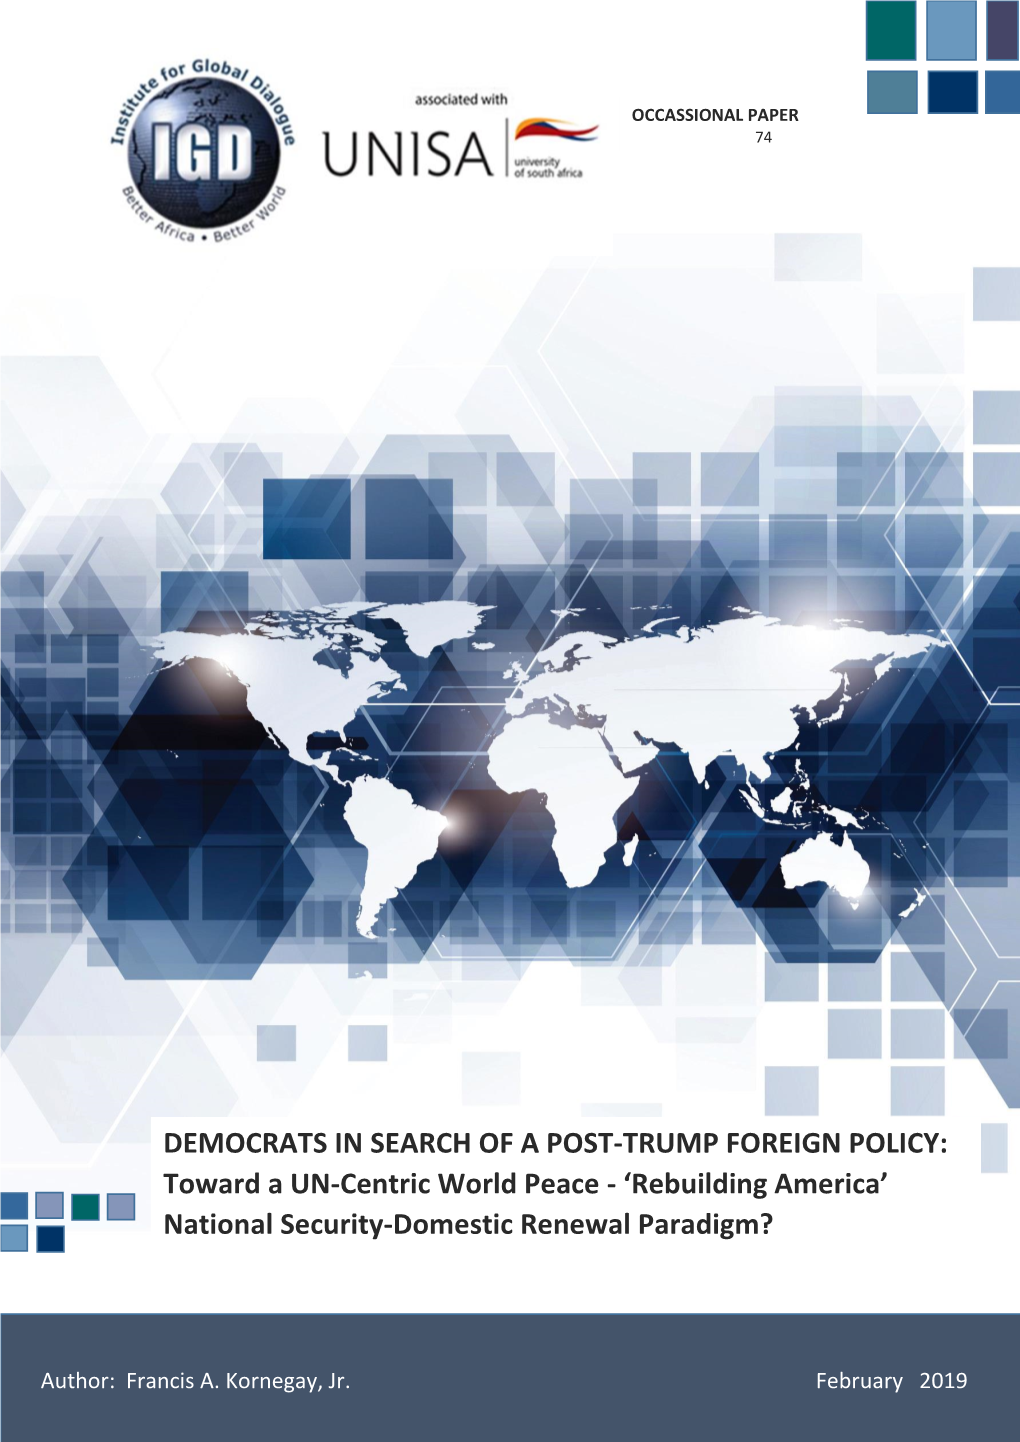 DEMOCRATS in SEARCH of a POST-TRUMP FOREIGN POLICY: Toward a UN -Centric World Peace - ‘Rebuilding America’ National Security -Domestic Renewal Paradigm?